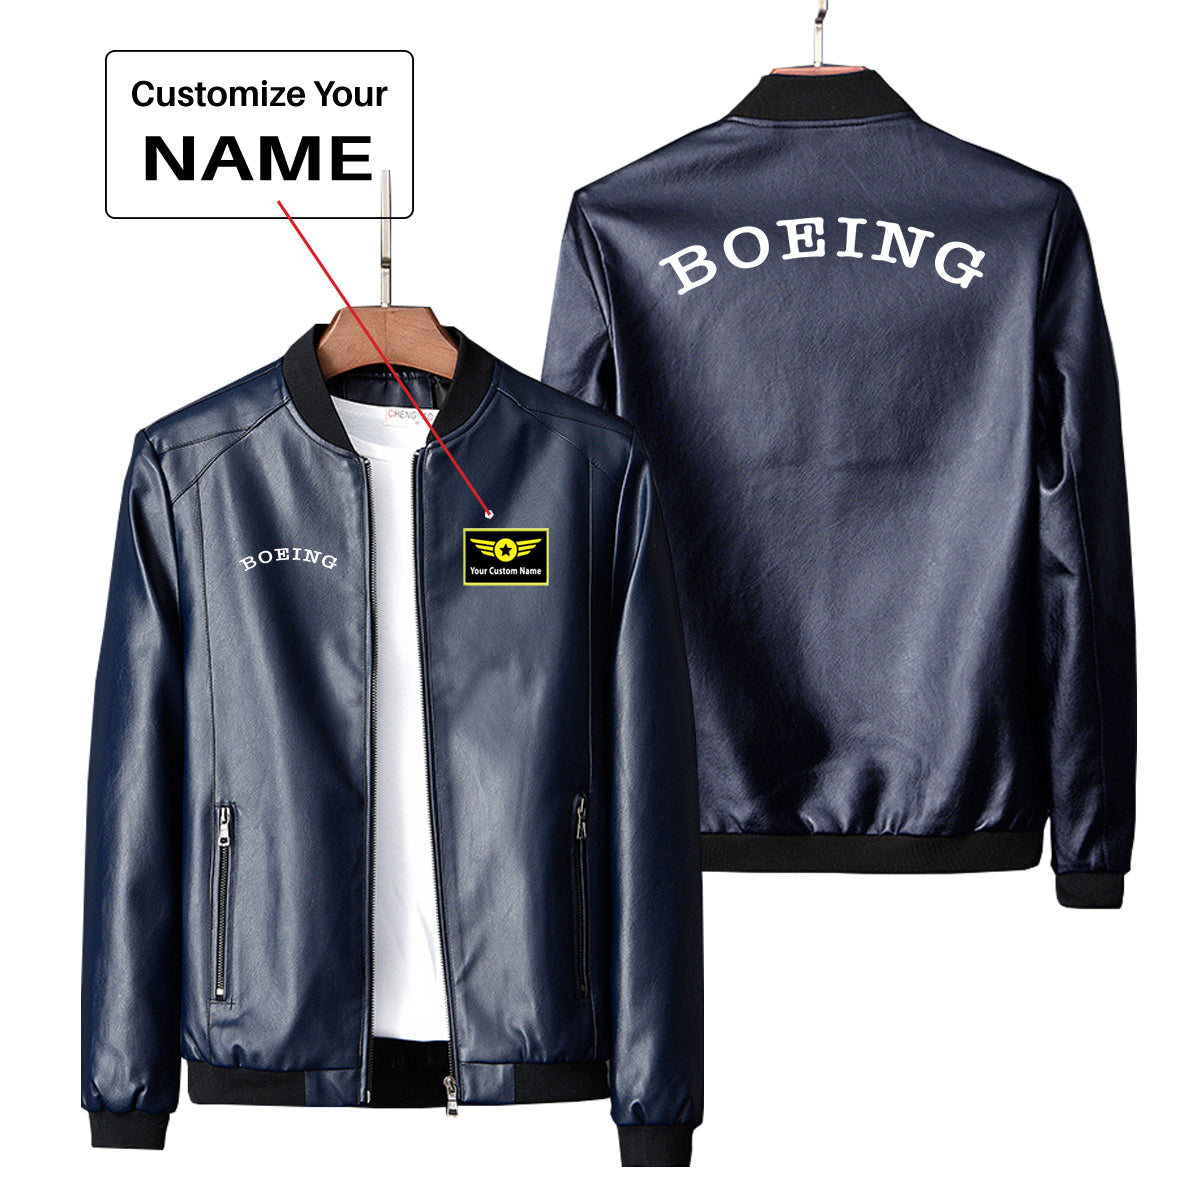 Special BOEING Text Designed PU Leather Jackets